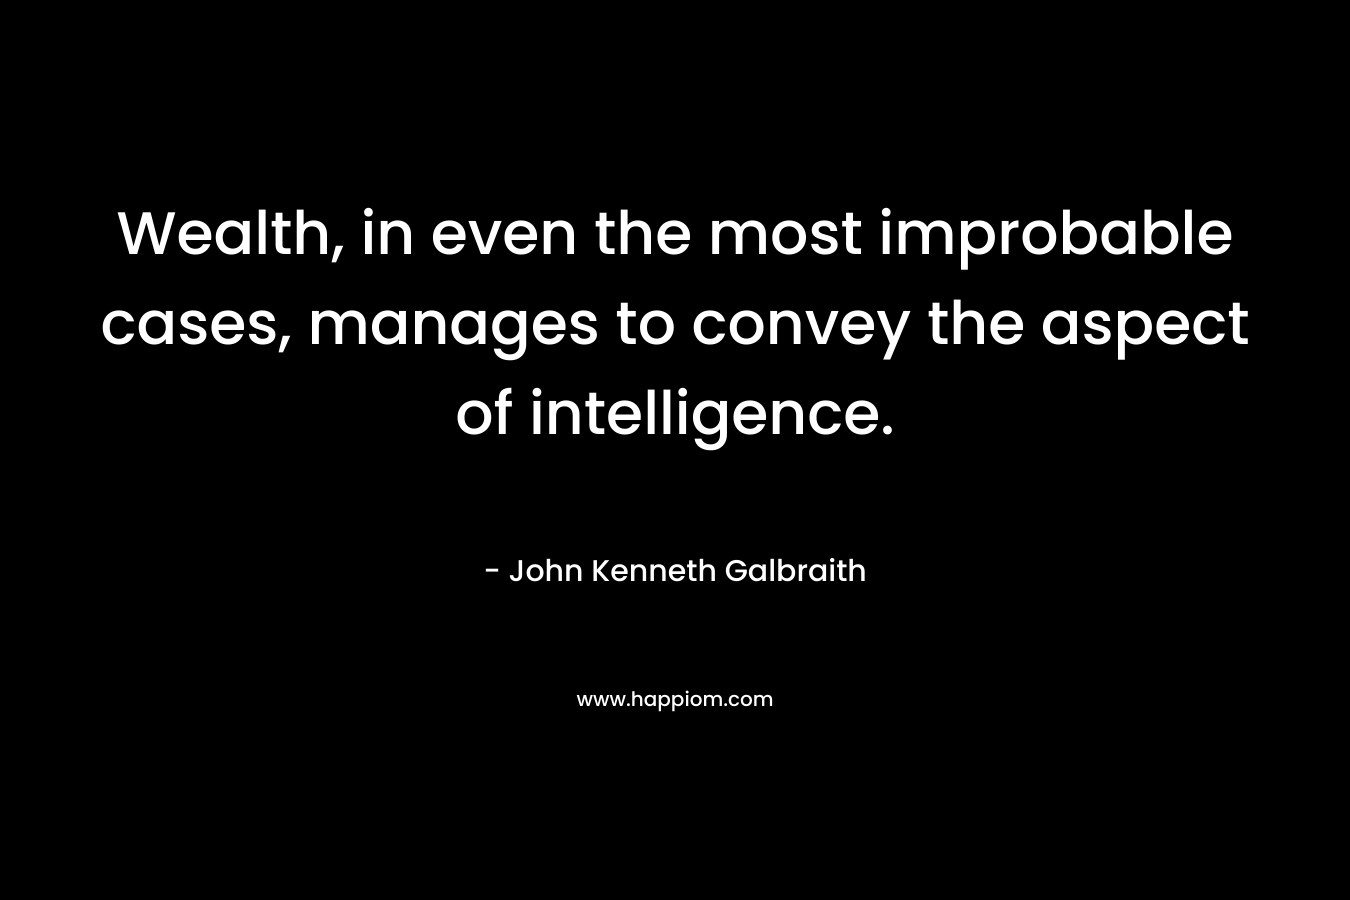 Wealth, in even the most improbable cases, manages to convey the aspect of intelligence. – John Kenneth Galbraith